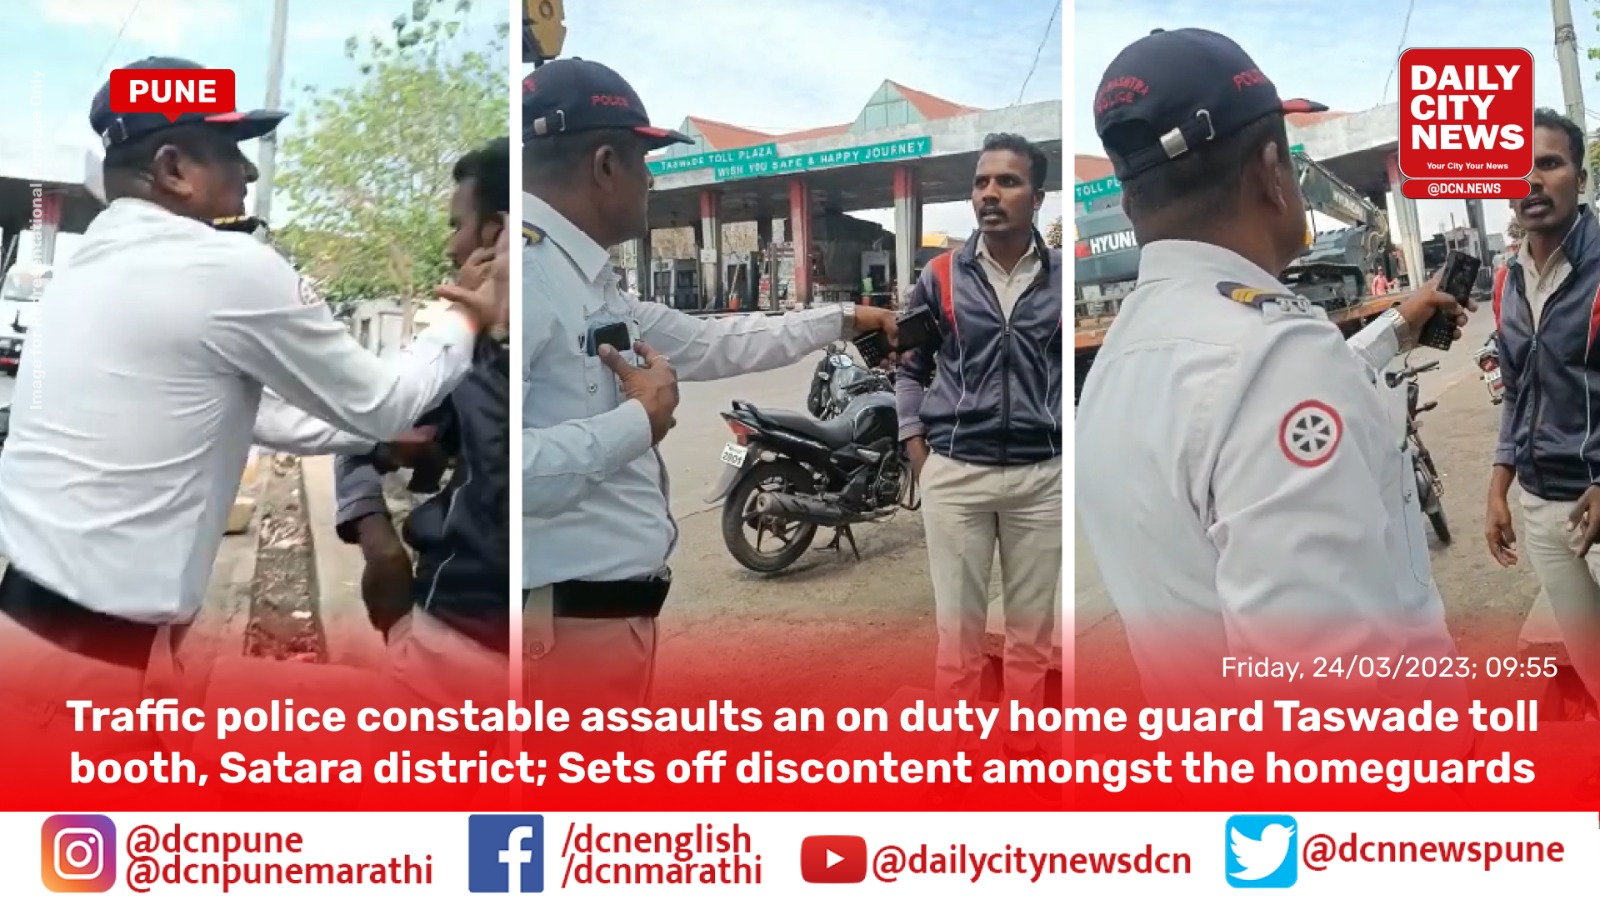 Traffic police constable assaults an on duty home guard Taswade toll booth, Satara district; Sets off discontent amongst the homeguards